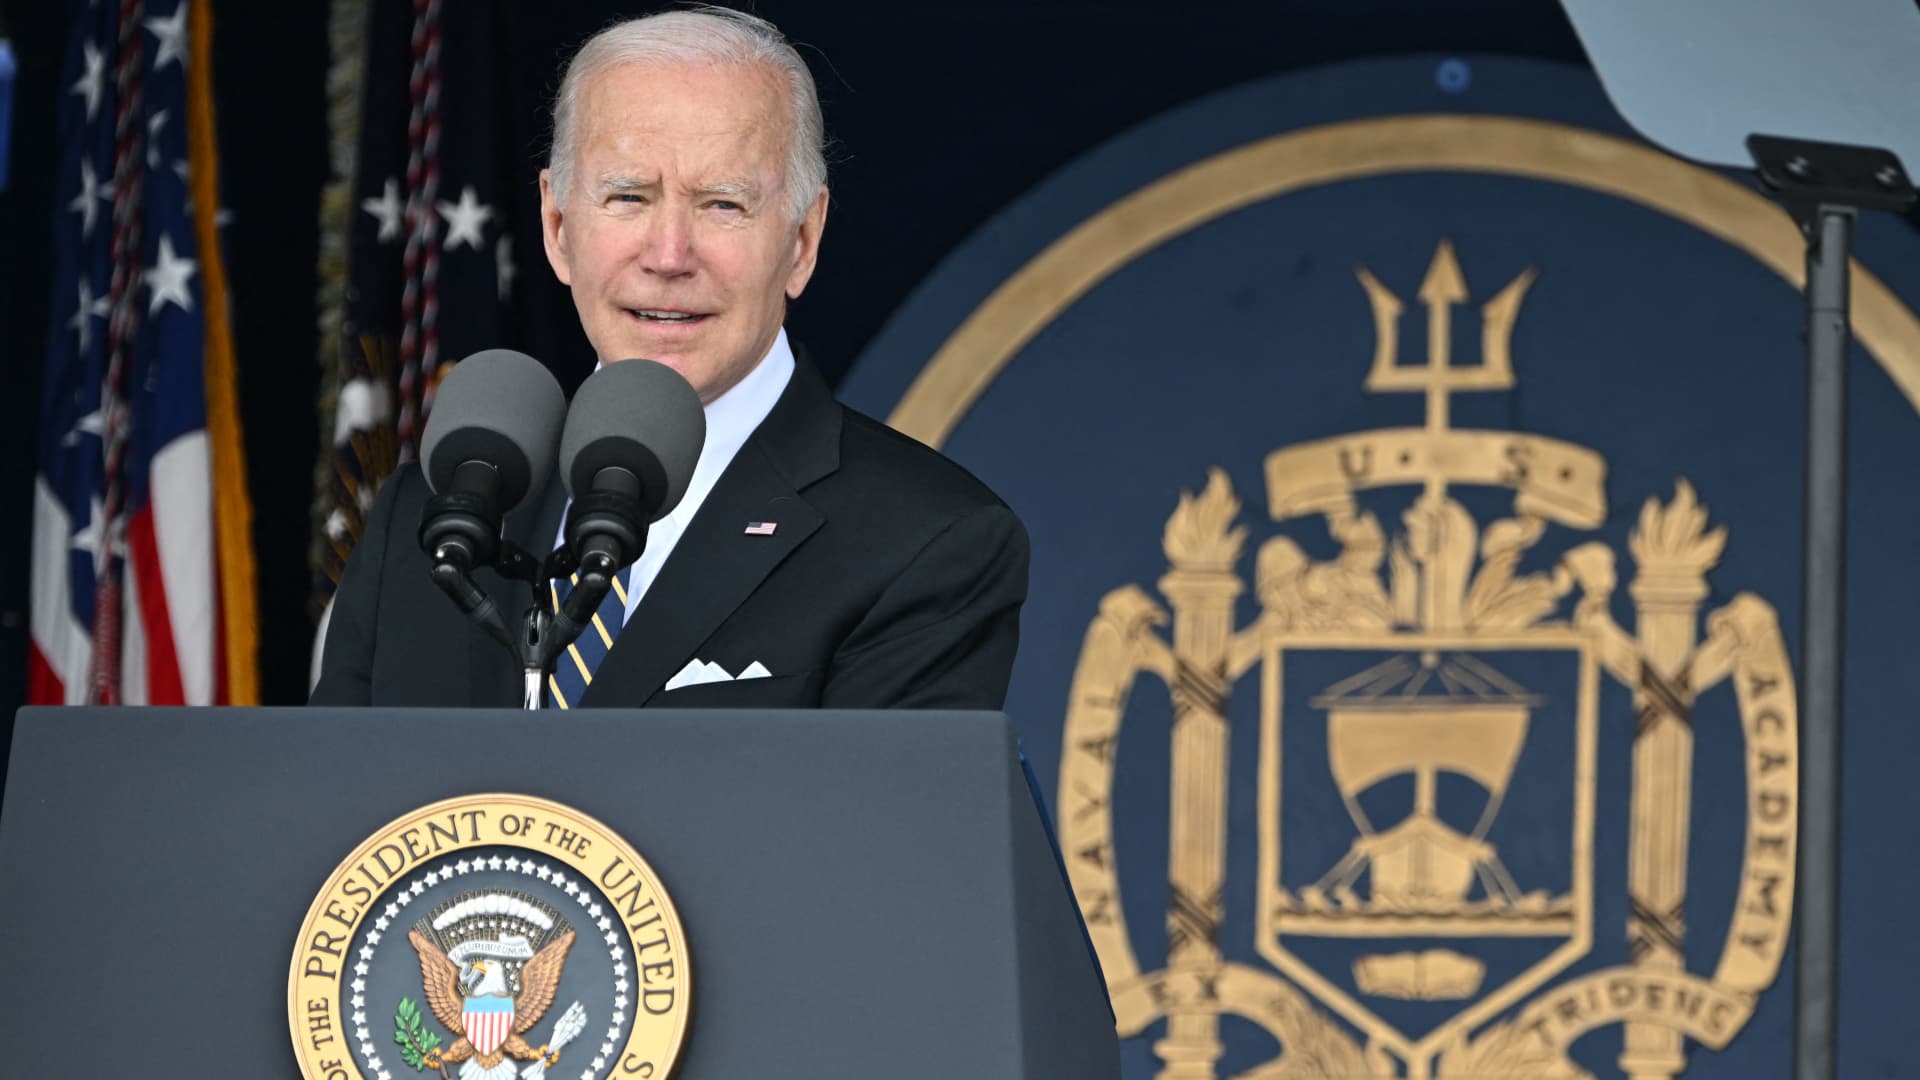 US President Joe Biden addresses the US Naval Academys Class of 2022 graduation and commissioning ceremony at Navy-Marine Corps Memorial Stadium in Annapolis, Maryland, on May 27, 2022.